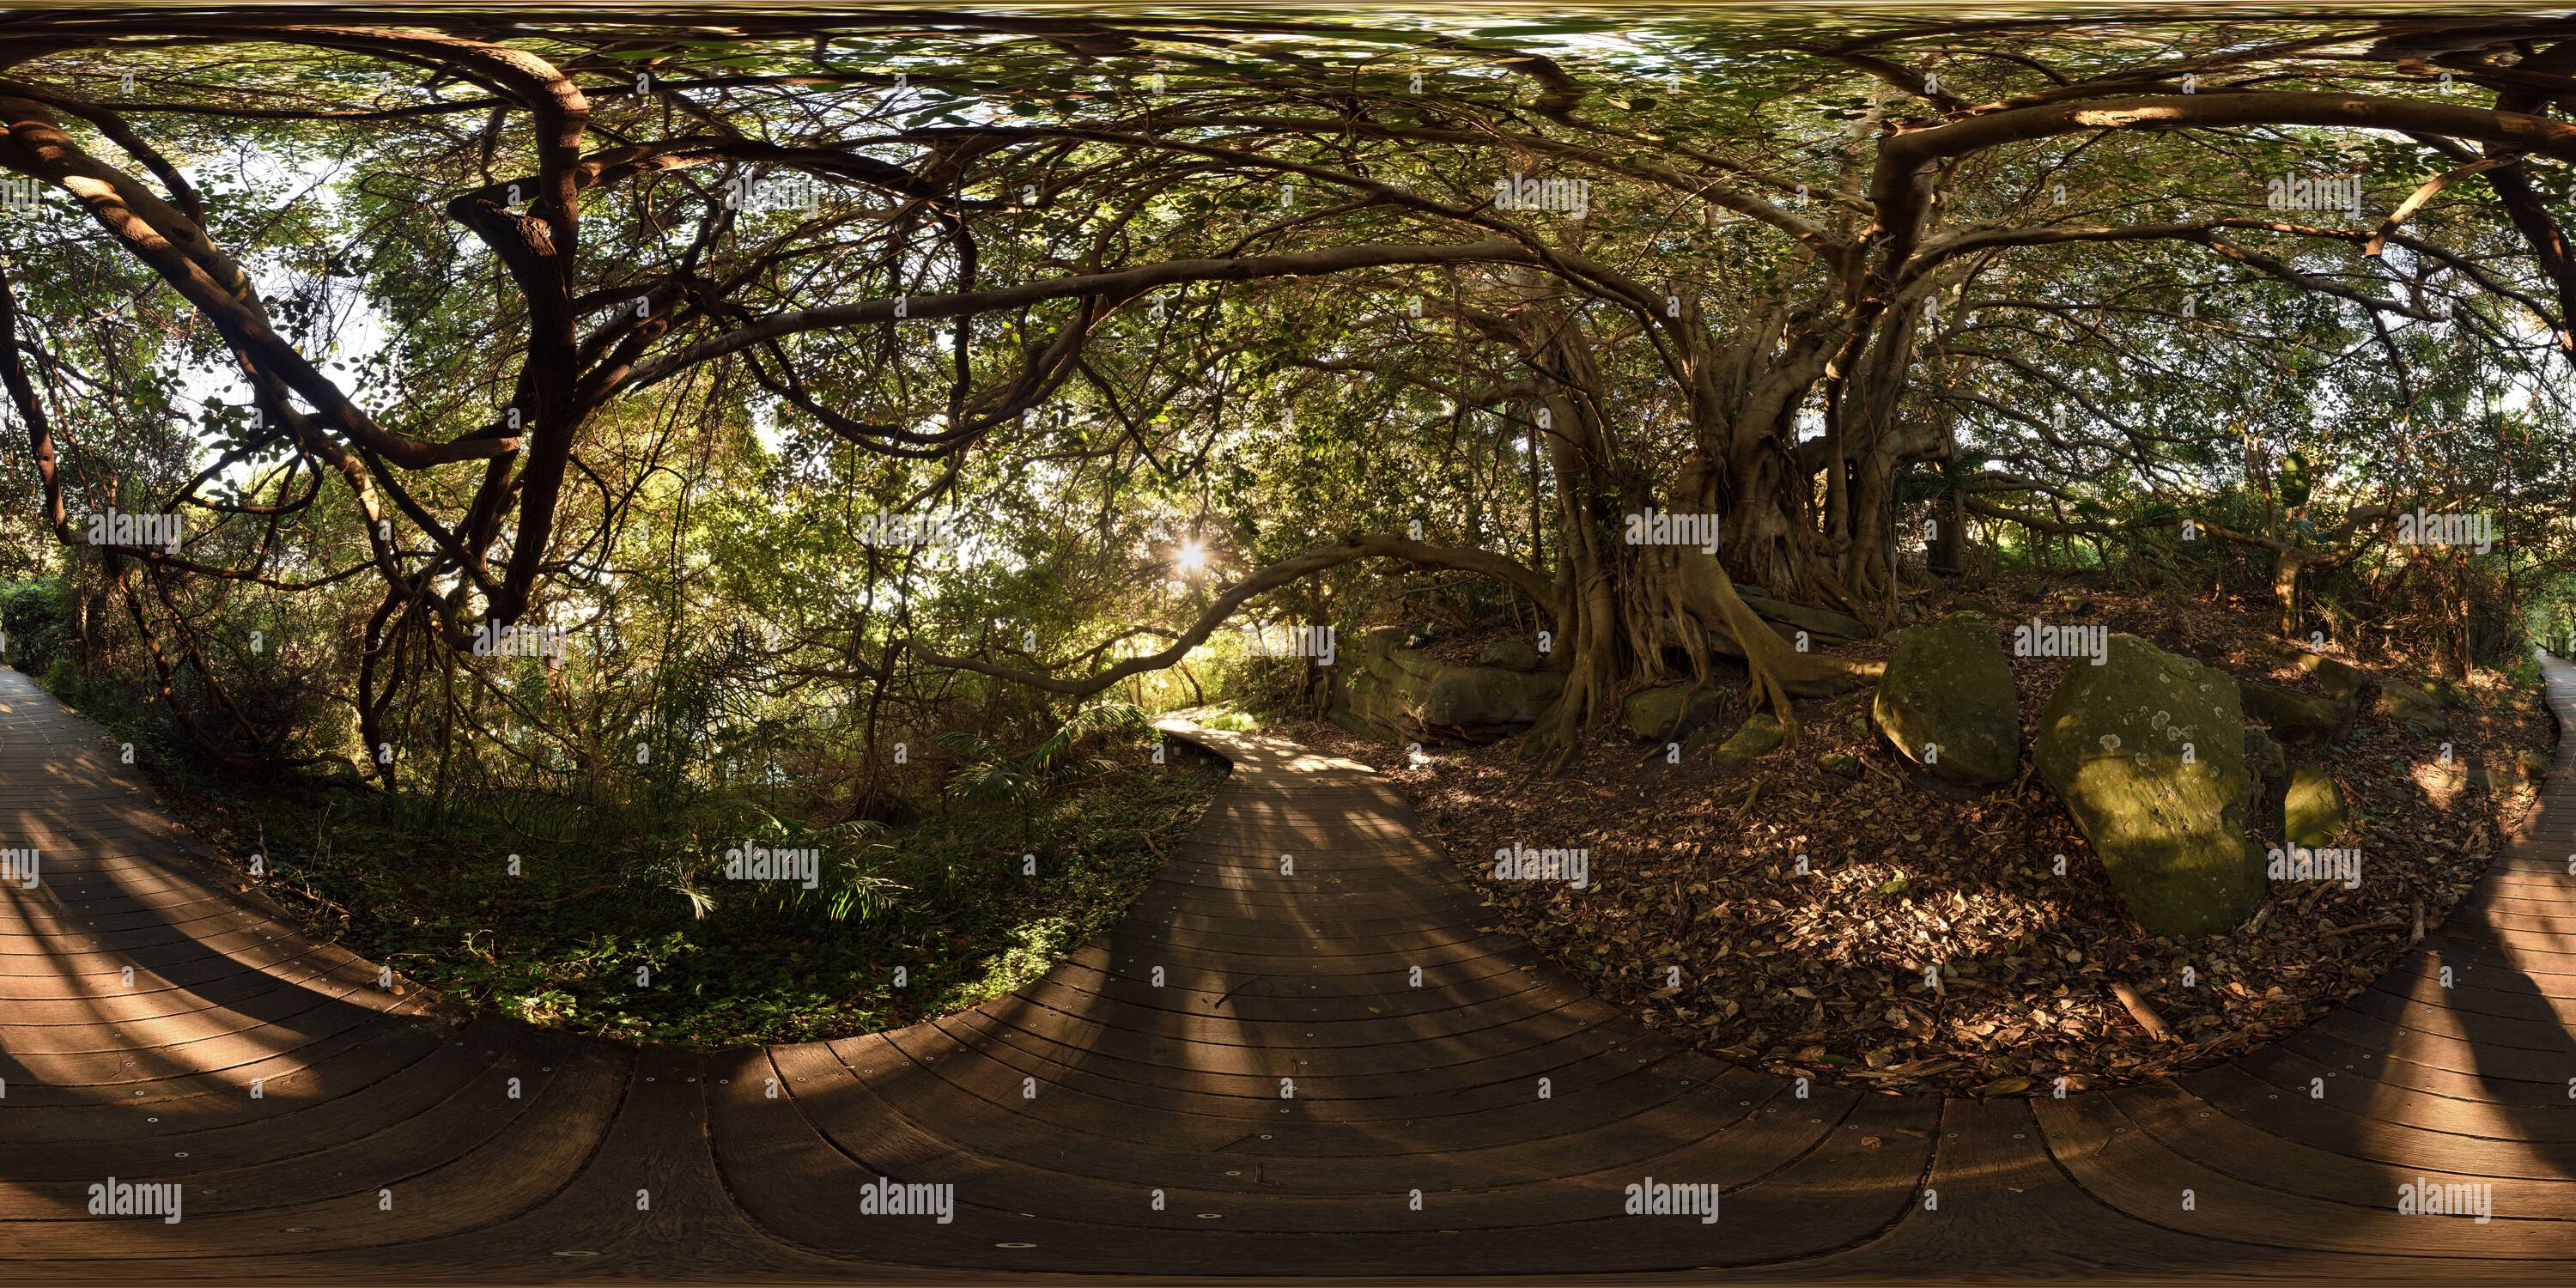 360 degree panoramic view of A 360° panorama from the boardwalk under the Canopy of a Port Jackson Fig on a Rock shelf, Hermitage Foreshore Walk, Rose Bay, Sydney